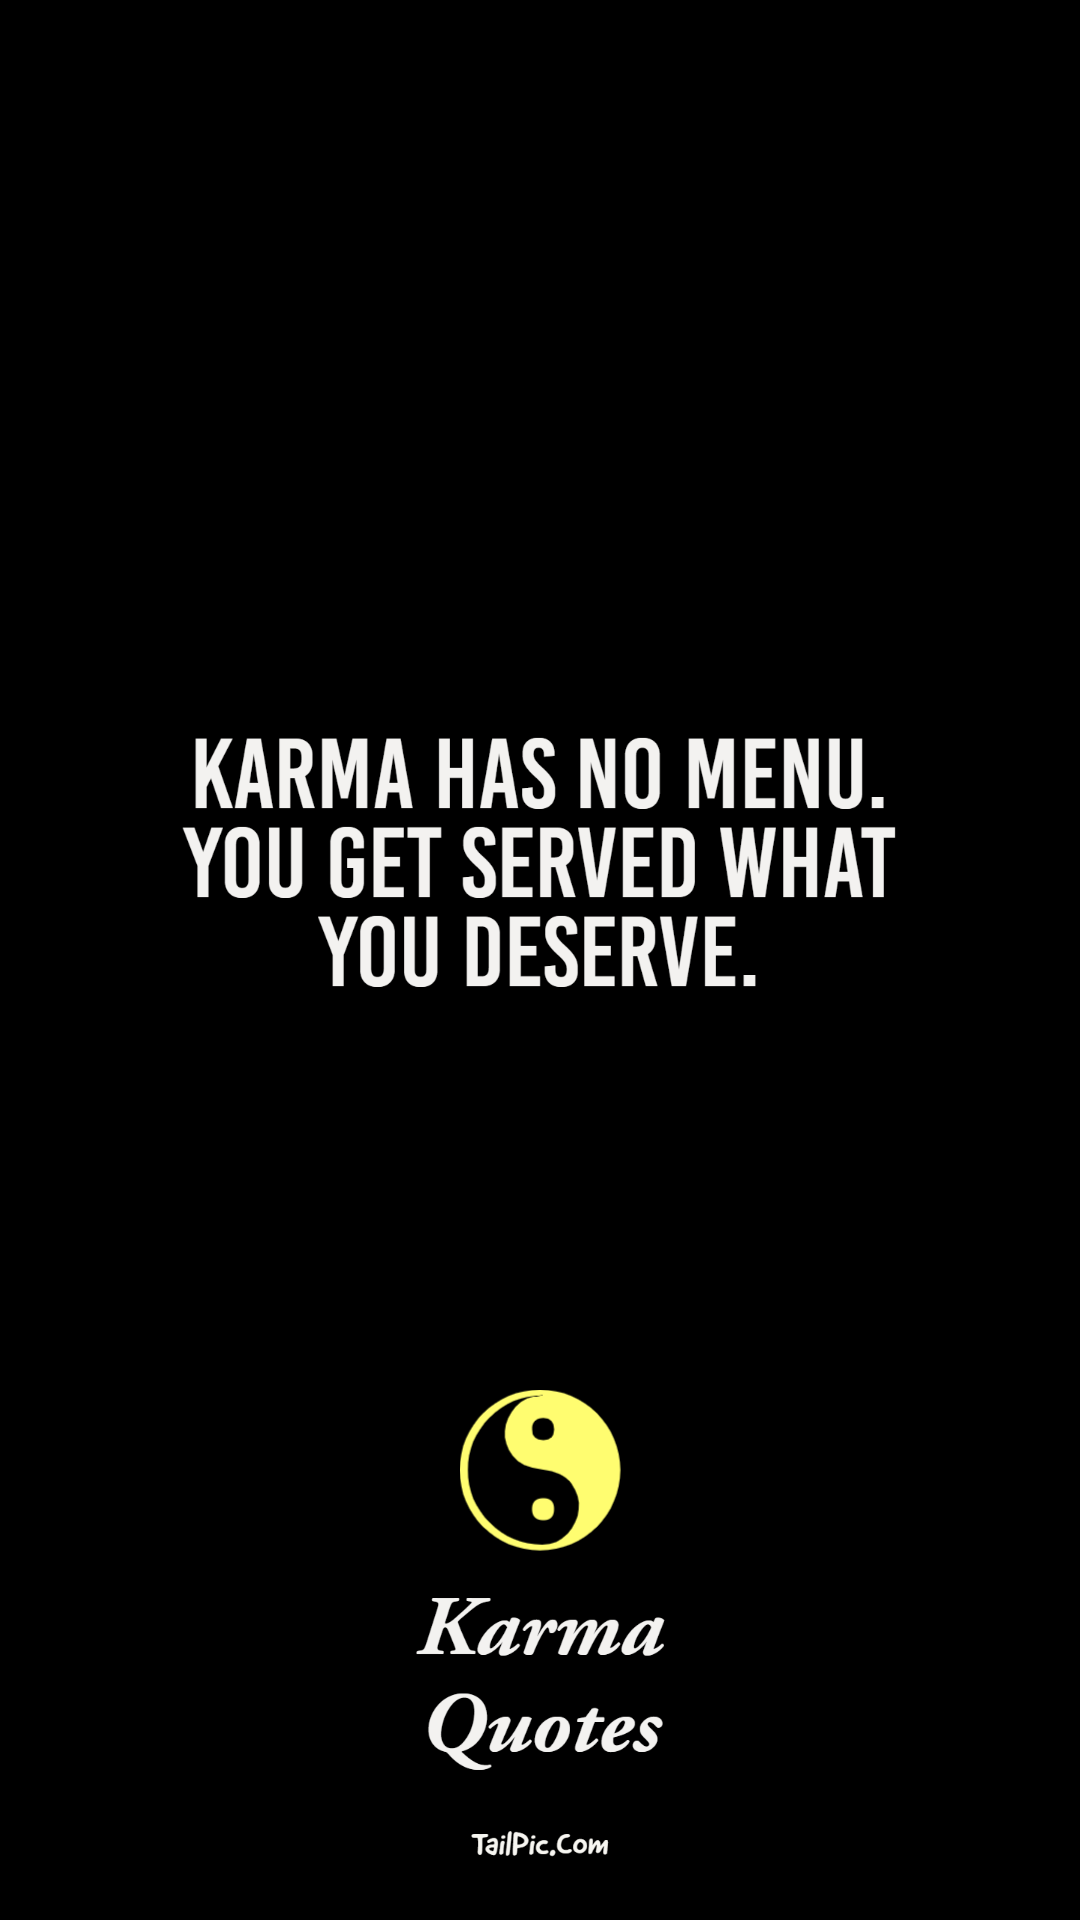 top karma quotes that will shift your mindset